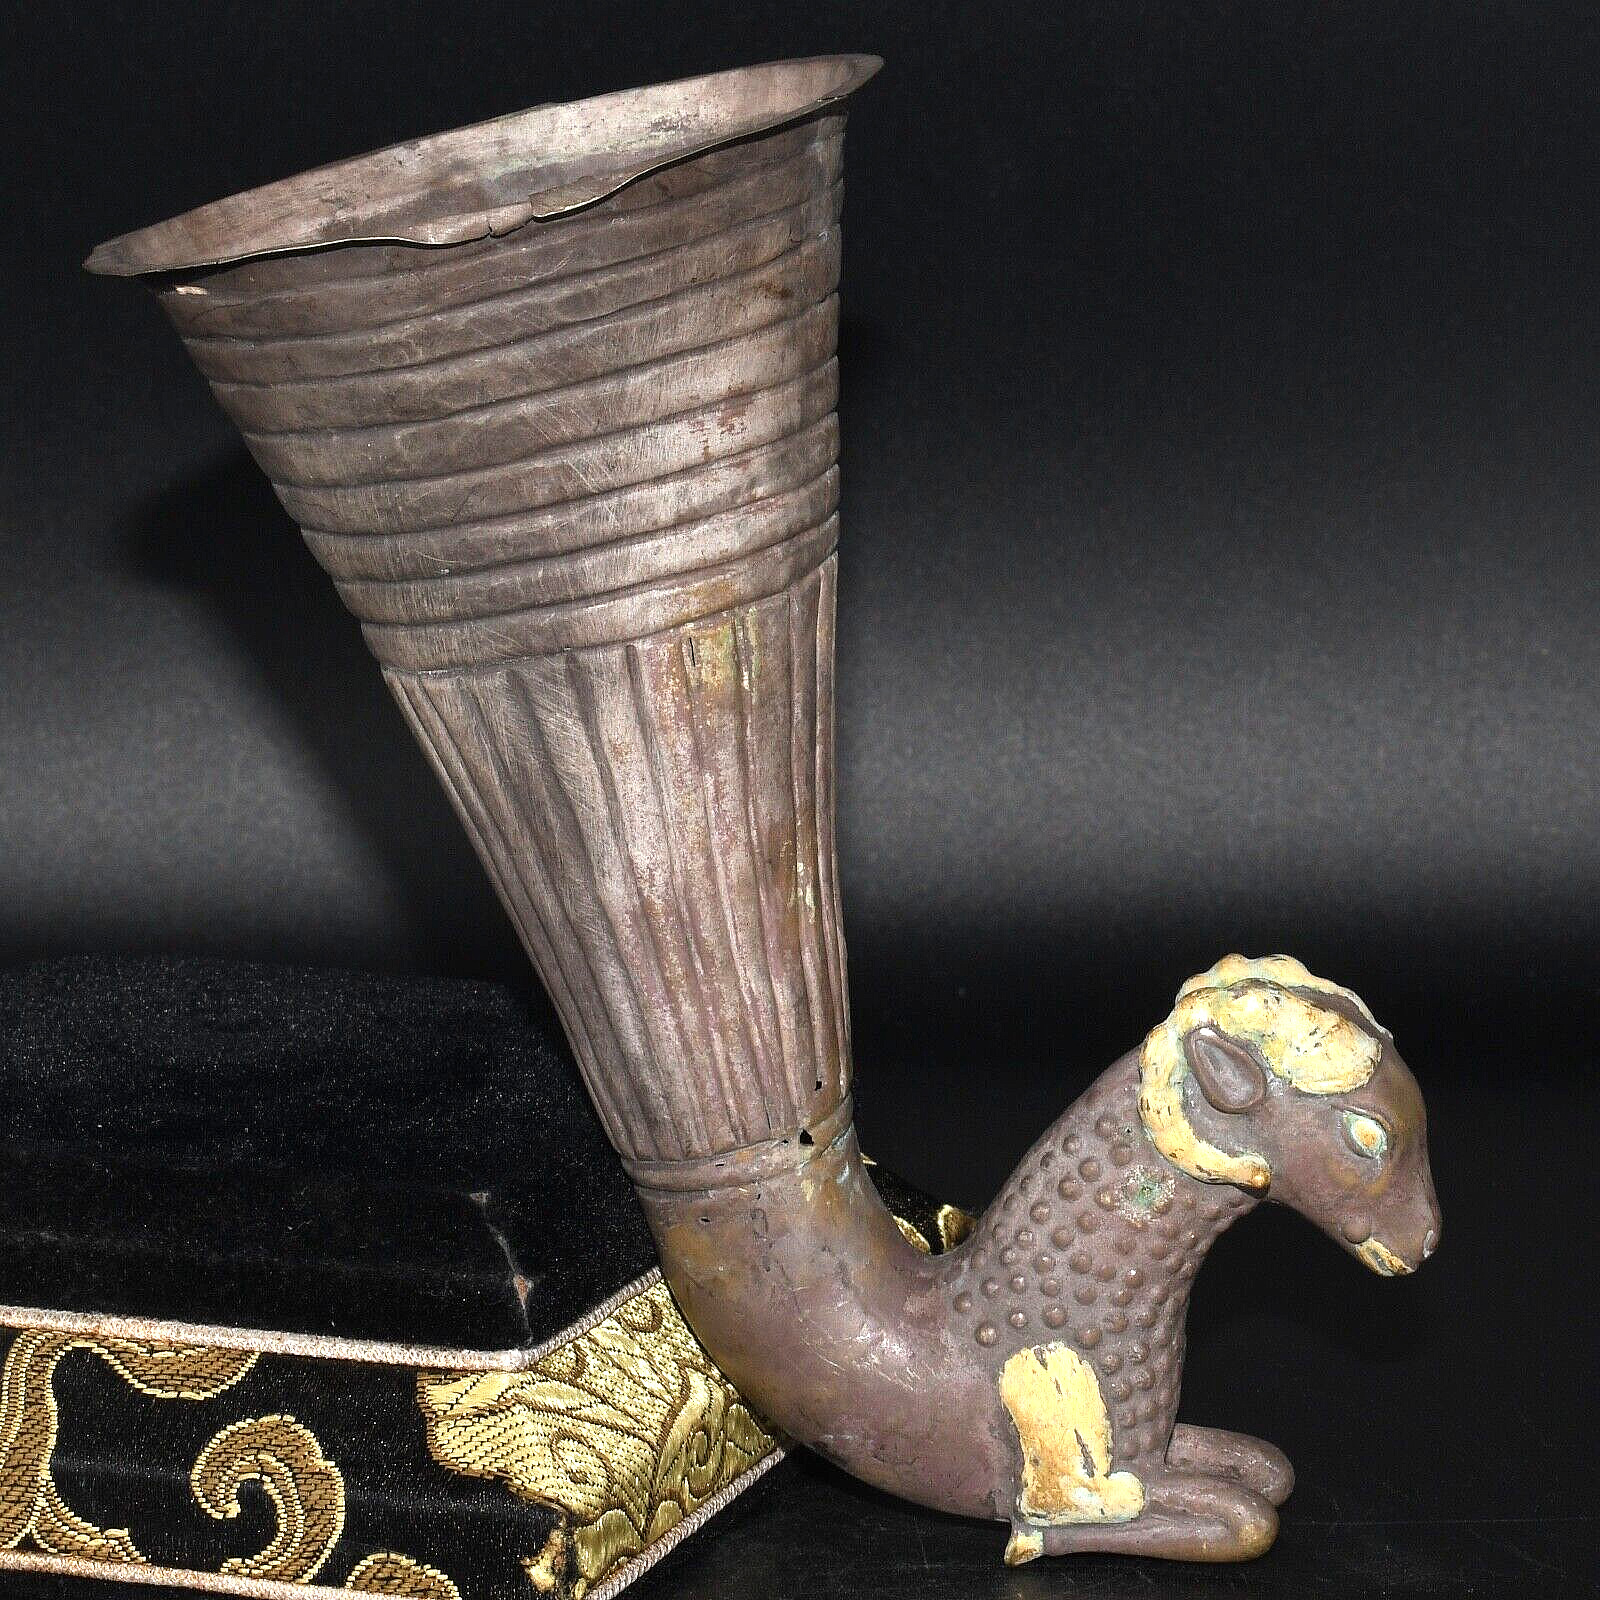 Large Ancient Achaemenid Empire Gold Gilded Silver Rhyton in form of a Ram